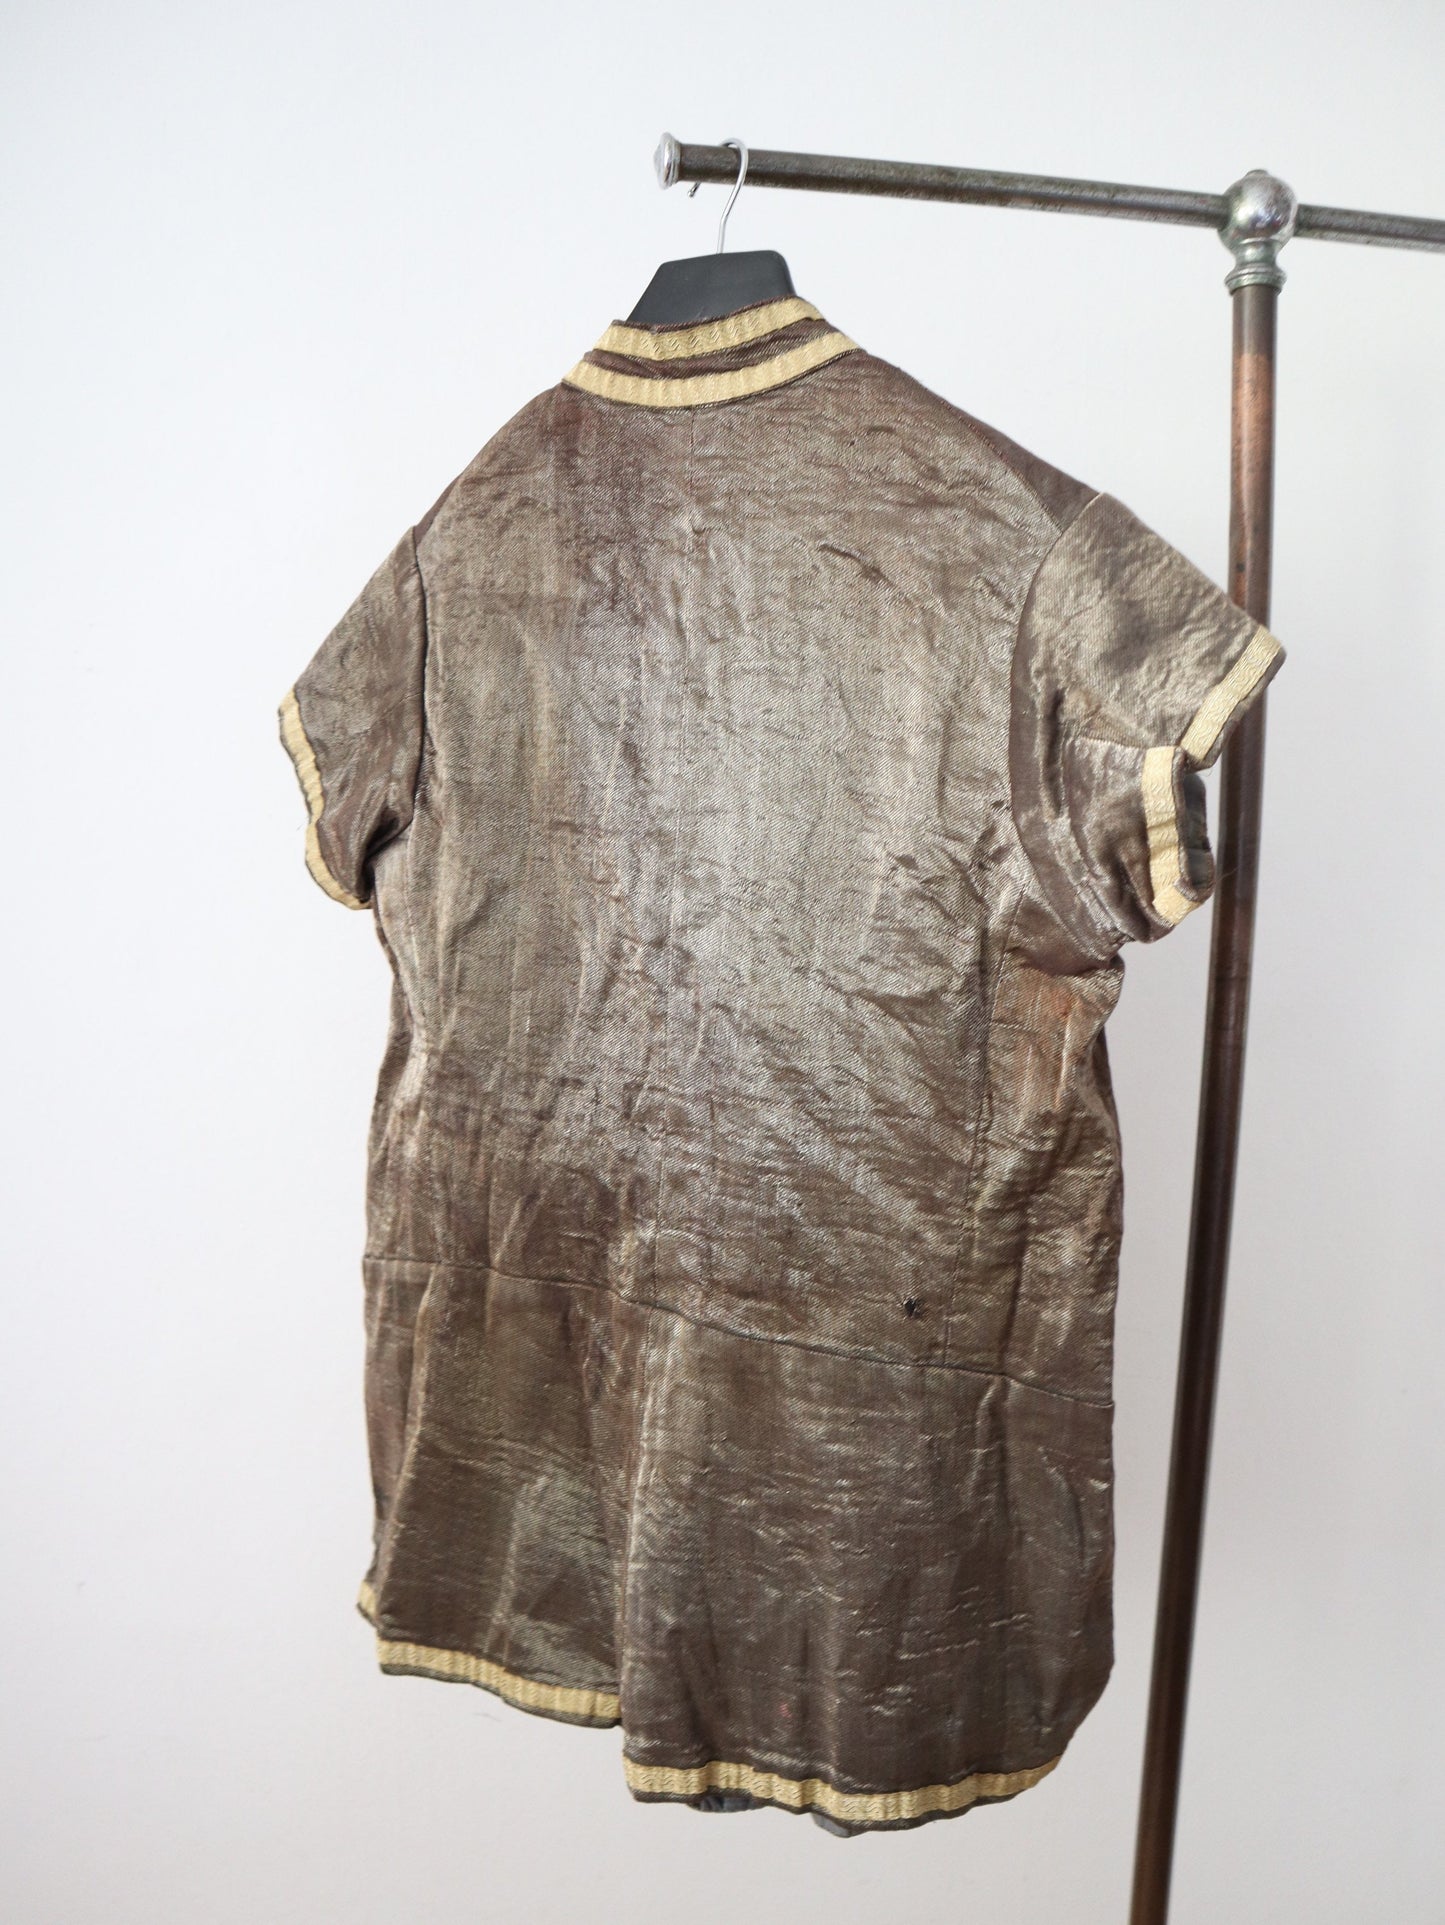 Antique Bronze Lamé Tunic Top French Opera Theatre Costume Metal Thread Chinese Style 1910s